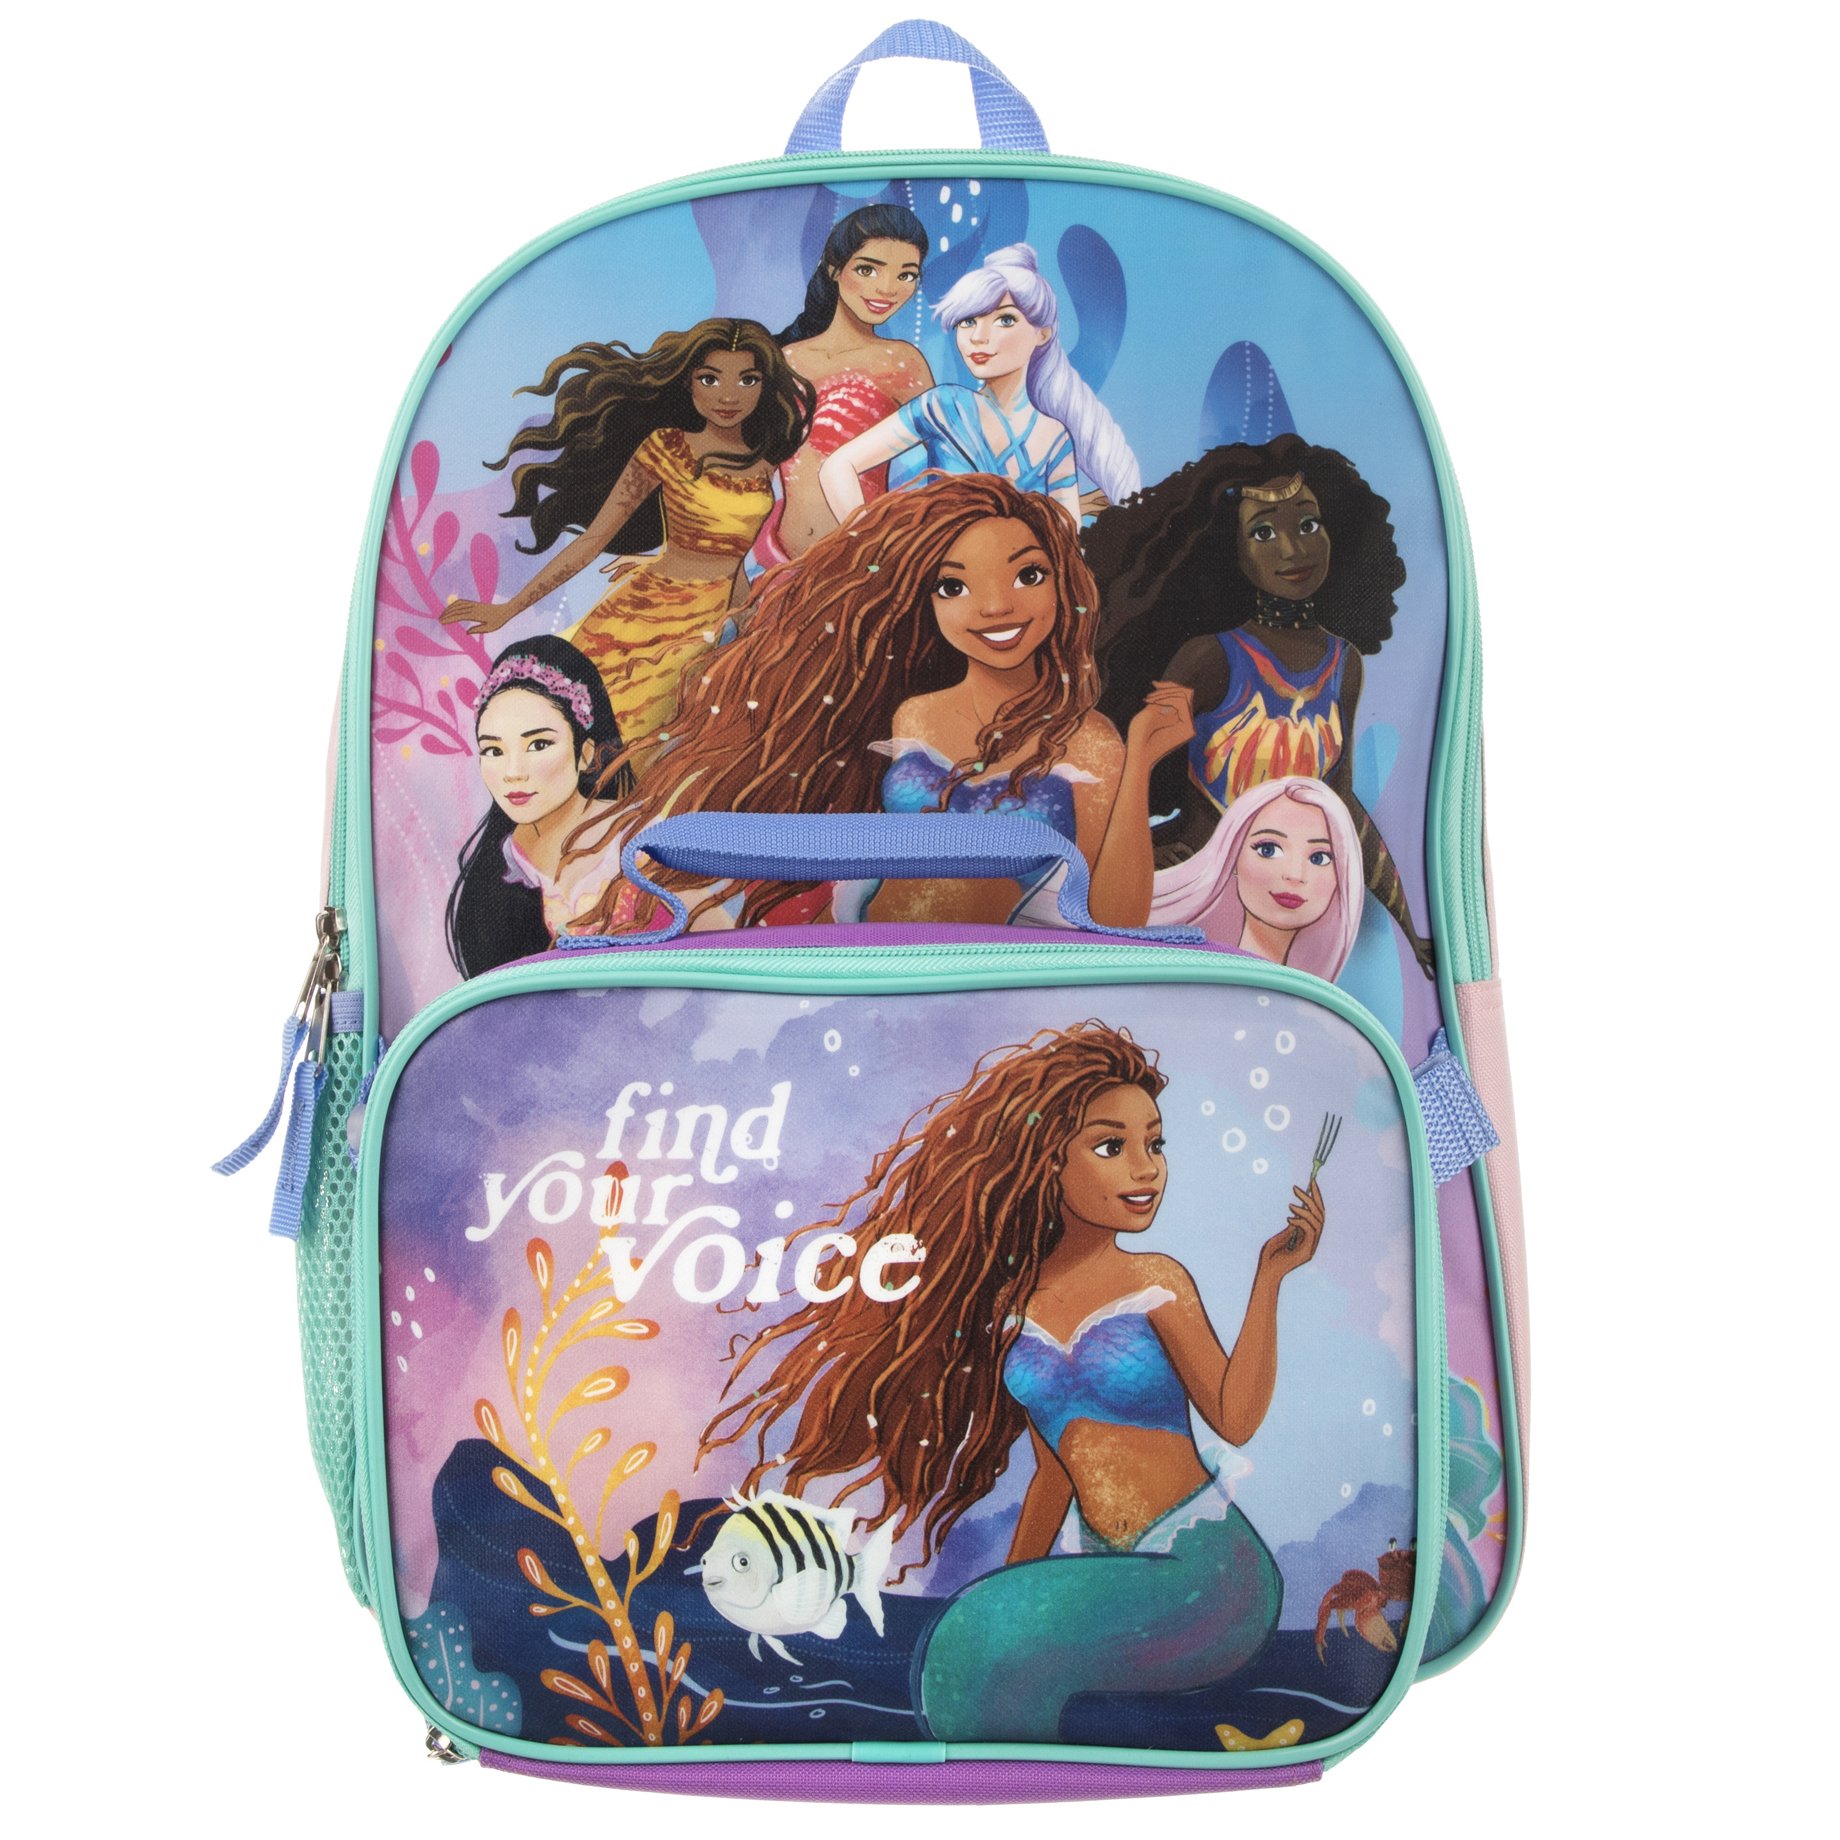 Disney Princess 16 inch Backpack for Girls 5 Piece School Lunch